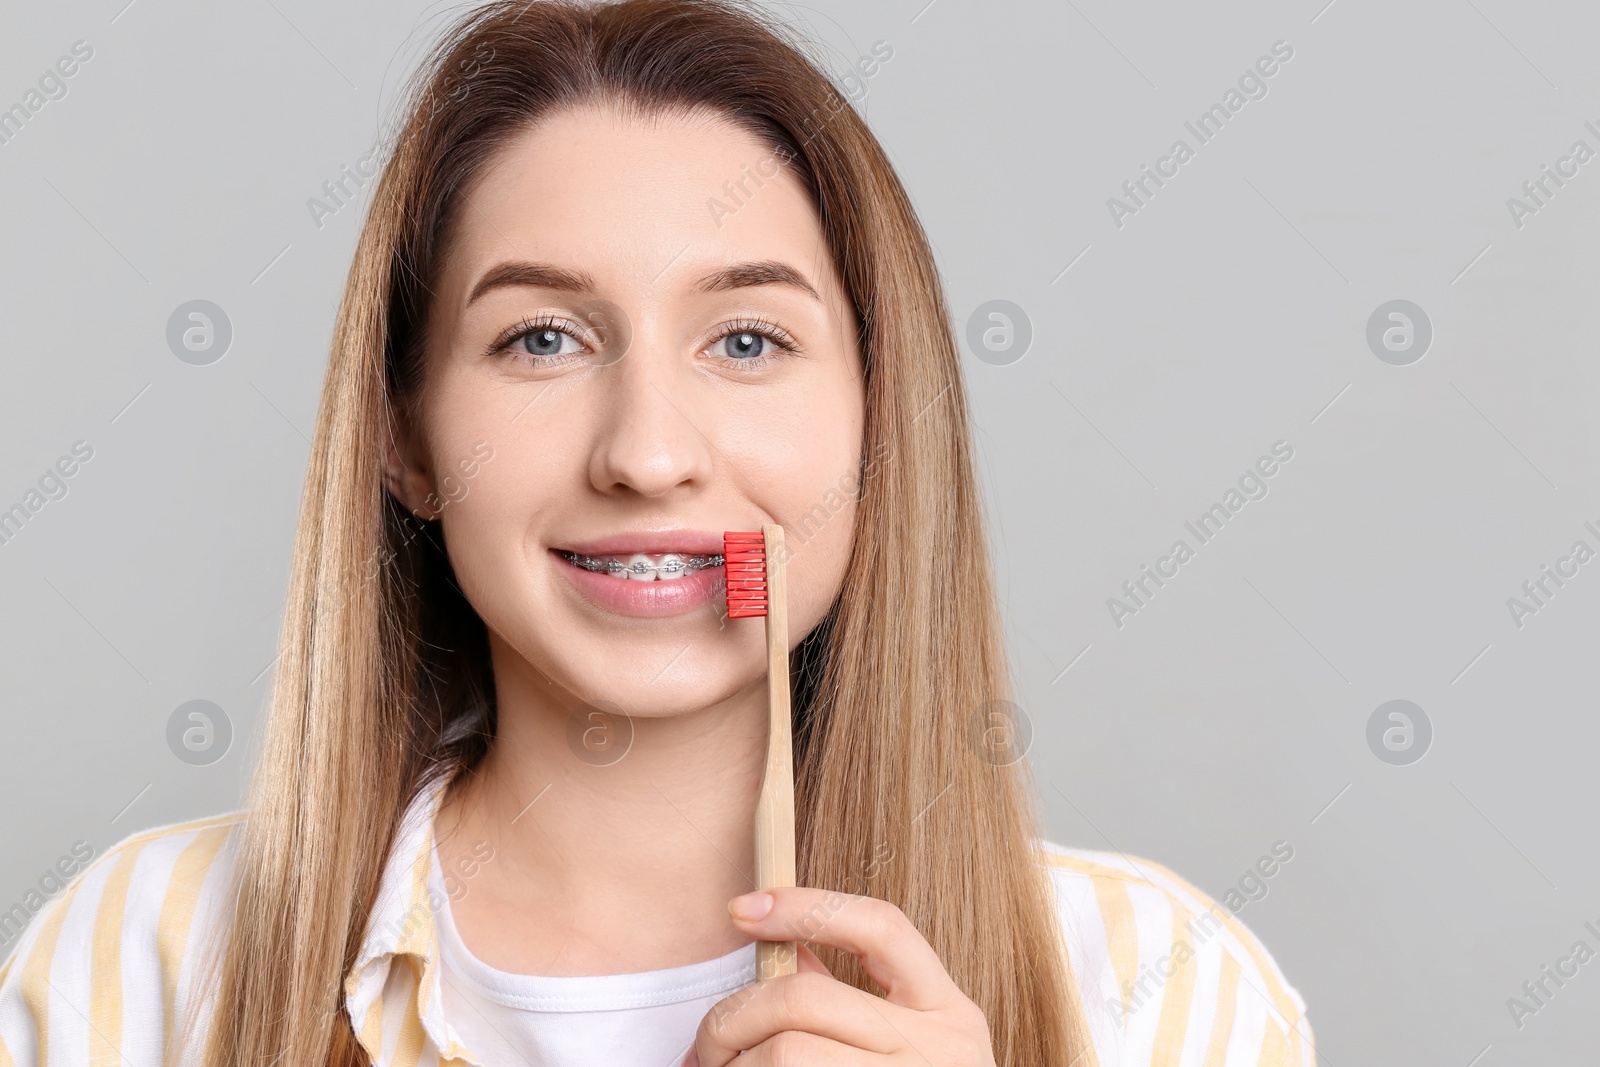 Photo of Portrait of smiling woman with dental braces and toothbrush on grey background